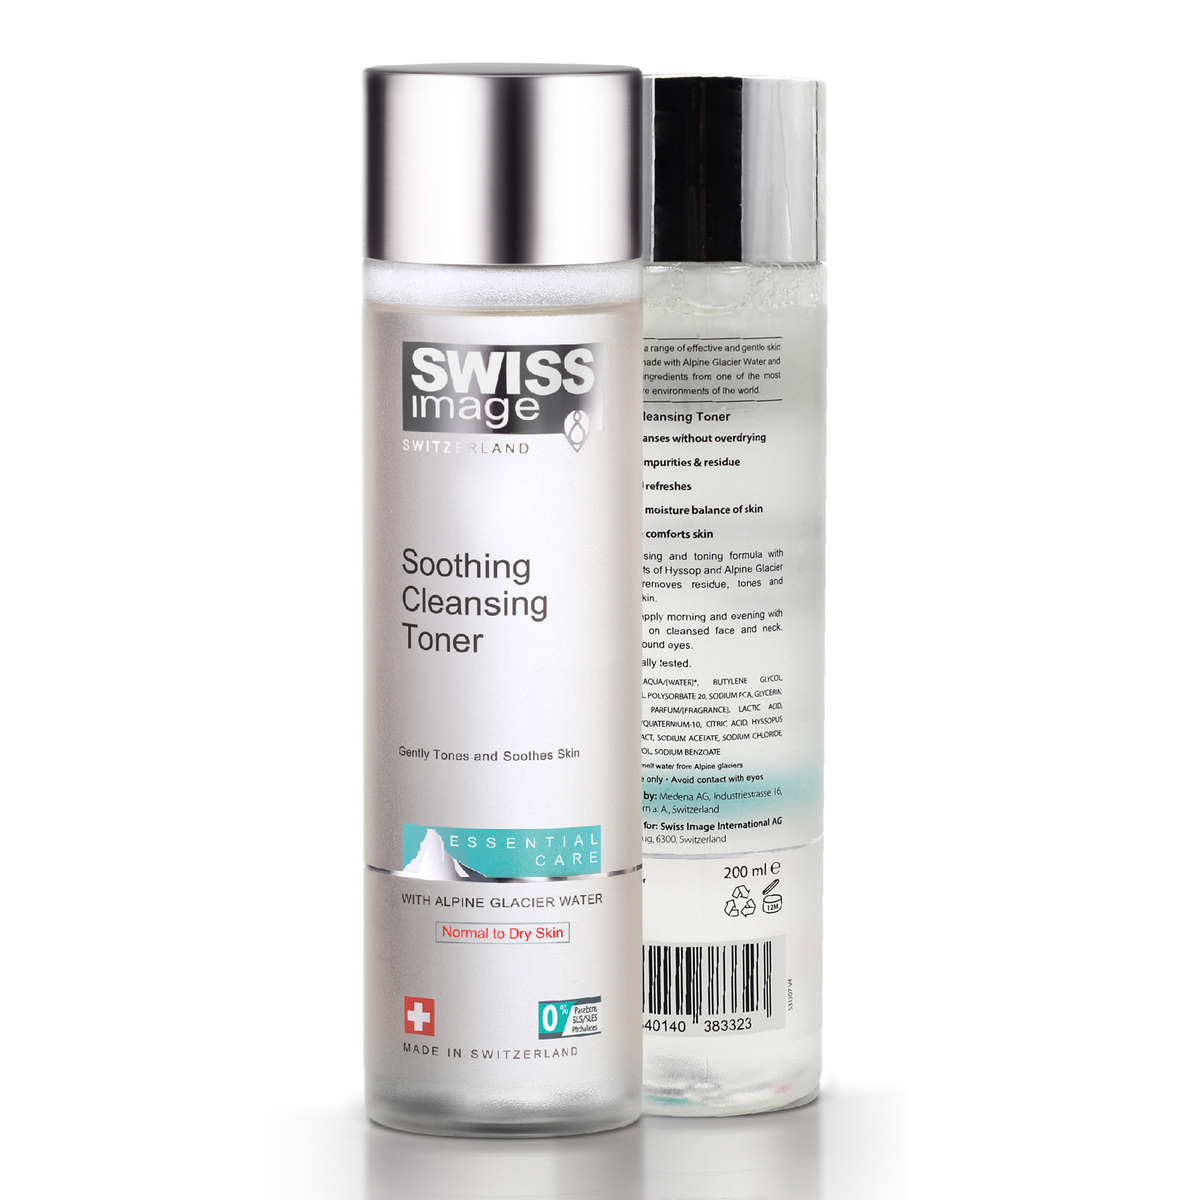 Swiss Image Soothing Cleansing Toner, 200 ml